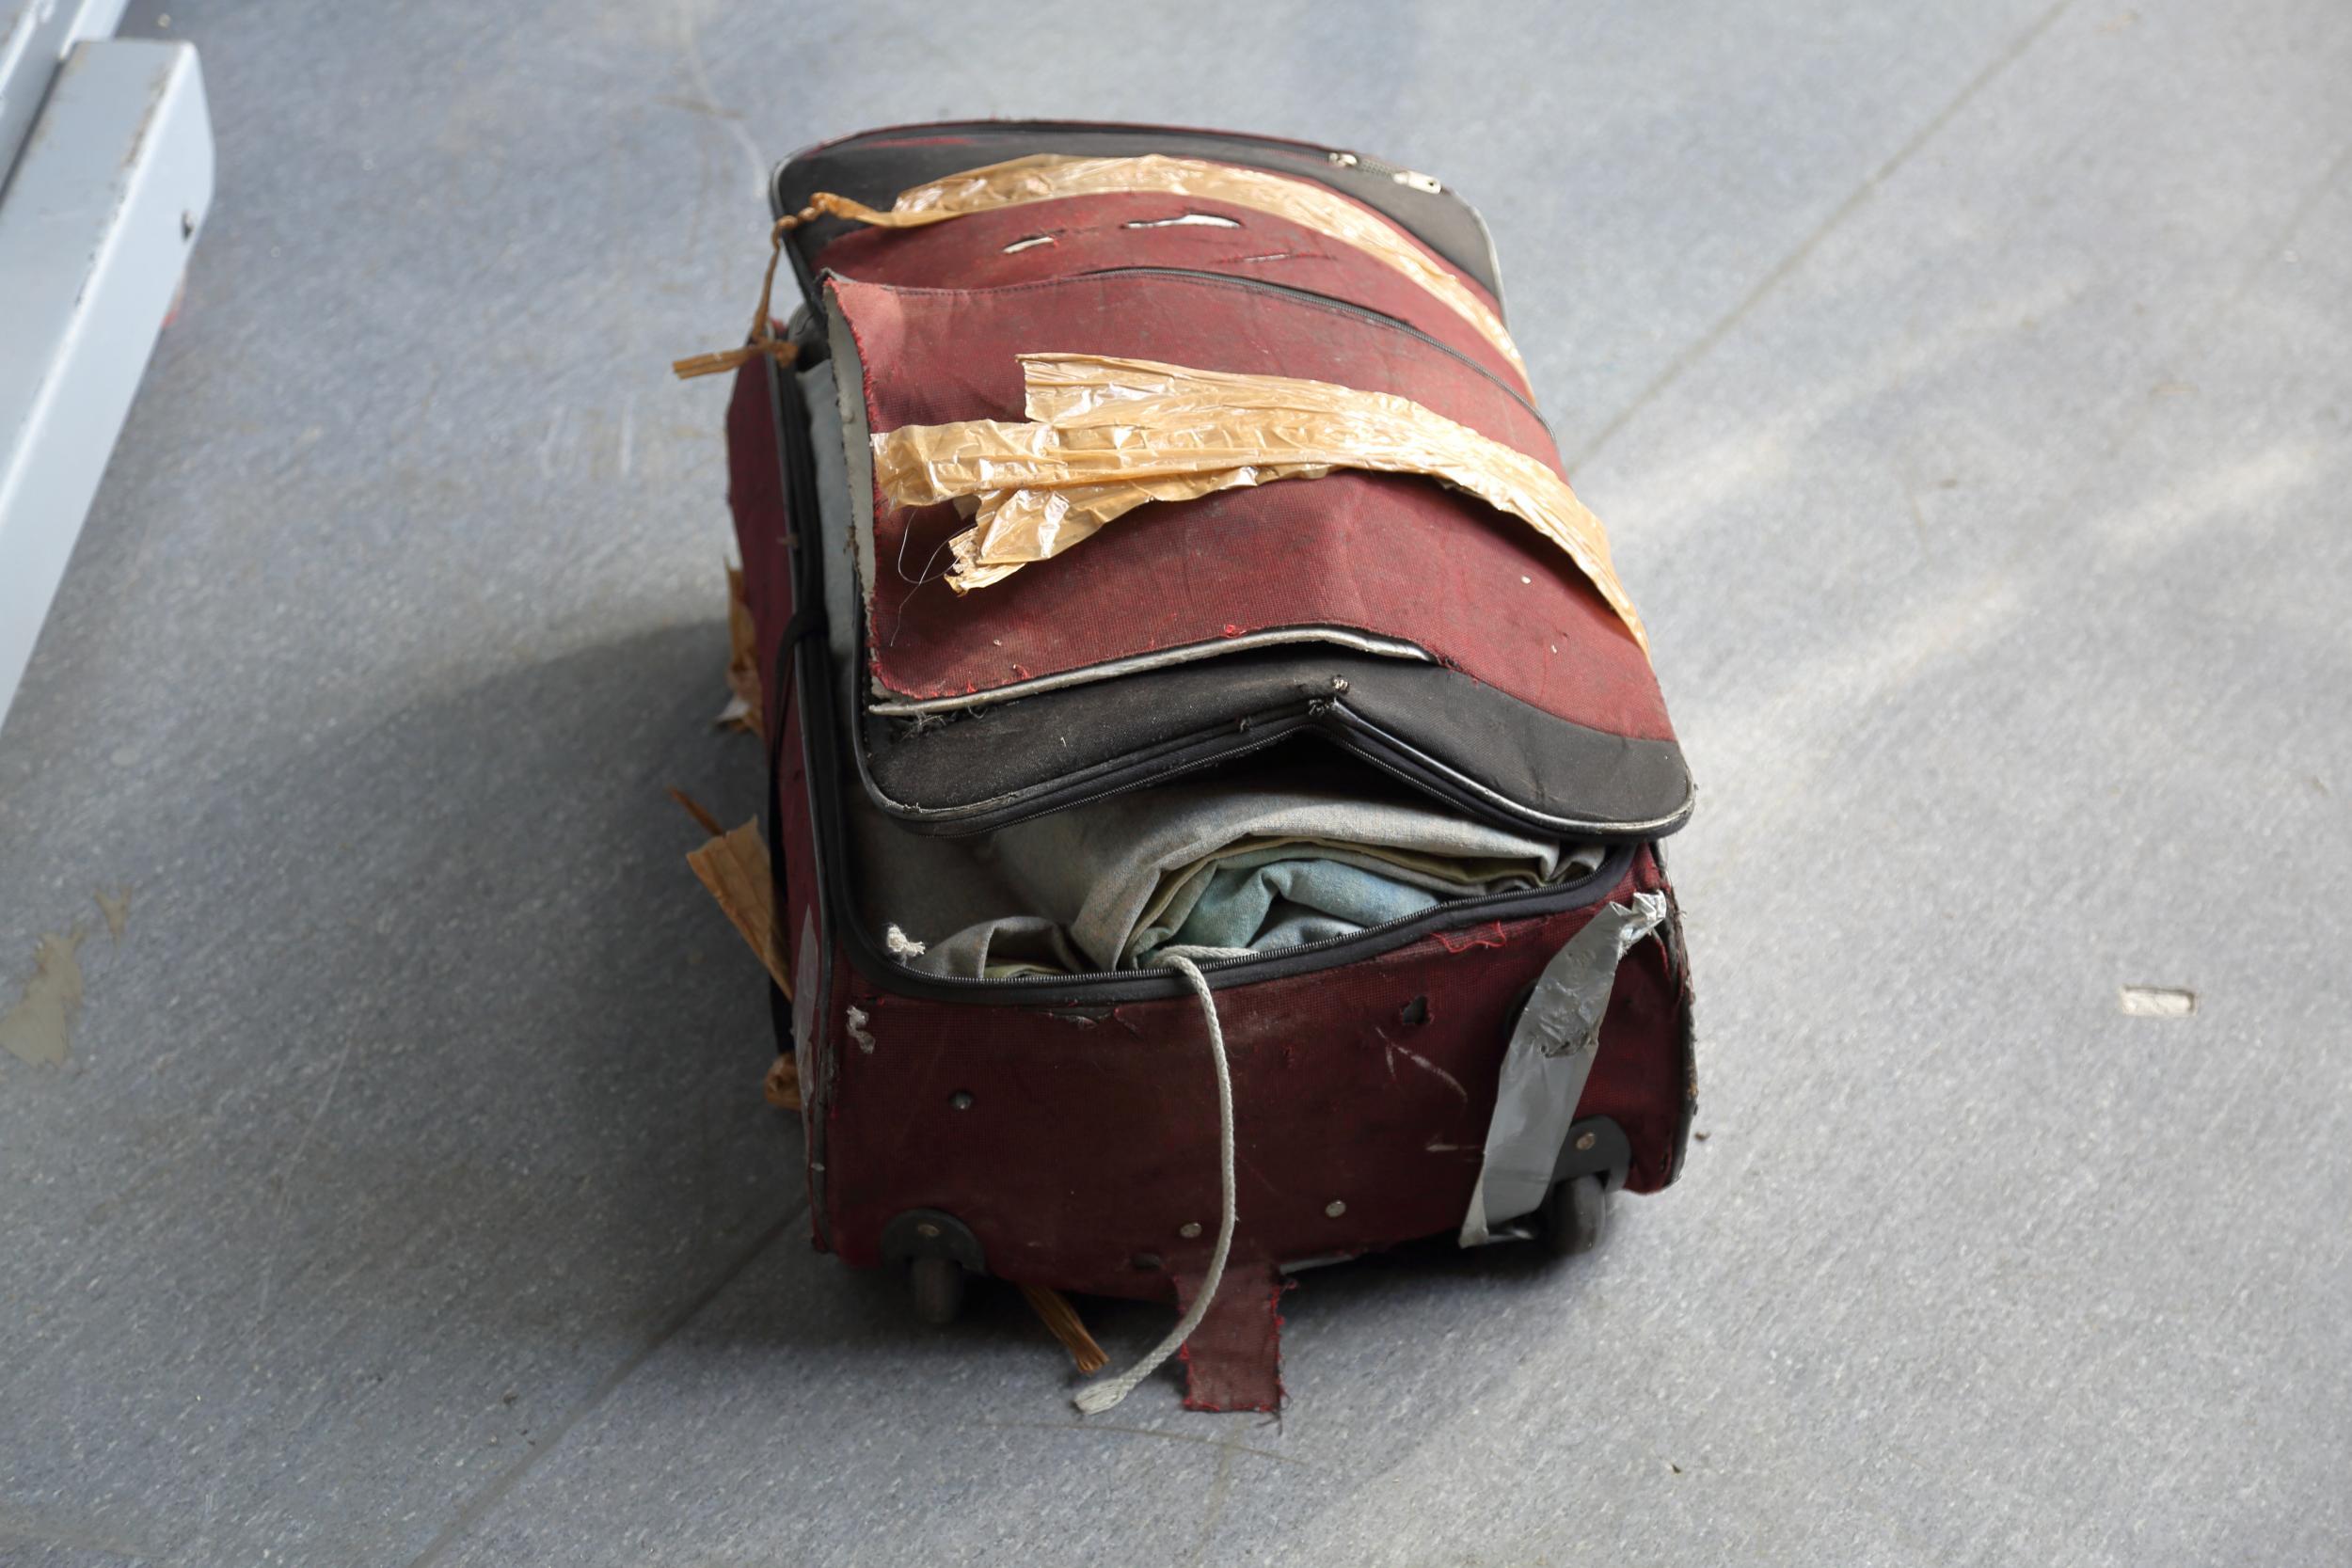 How to deal with baggage lost, delayed or damaged by the airline? - HubPages